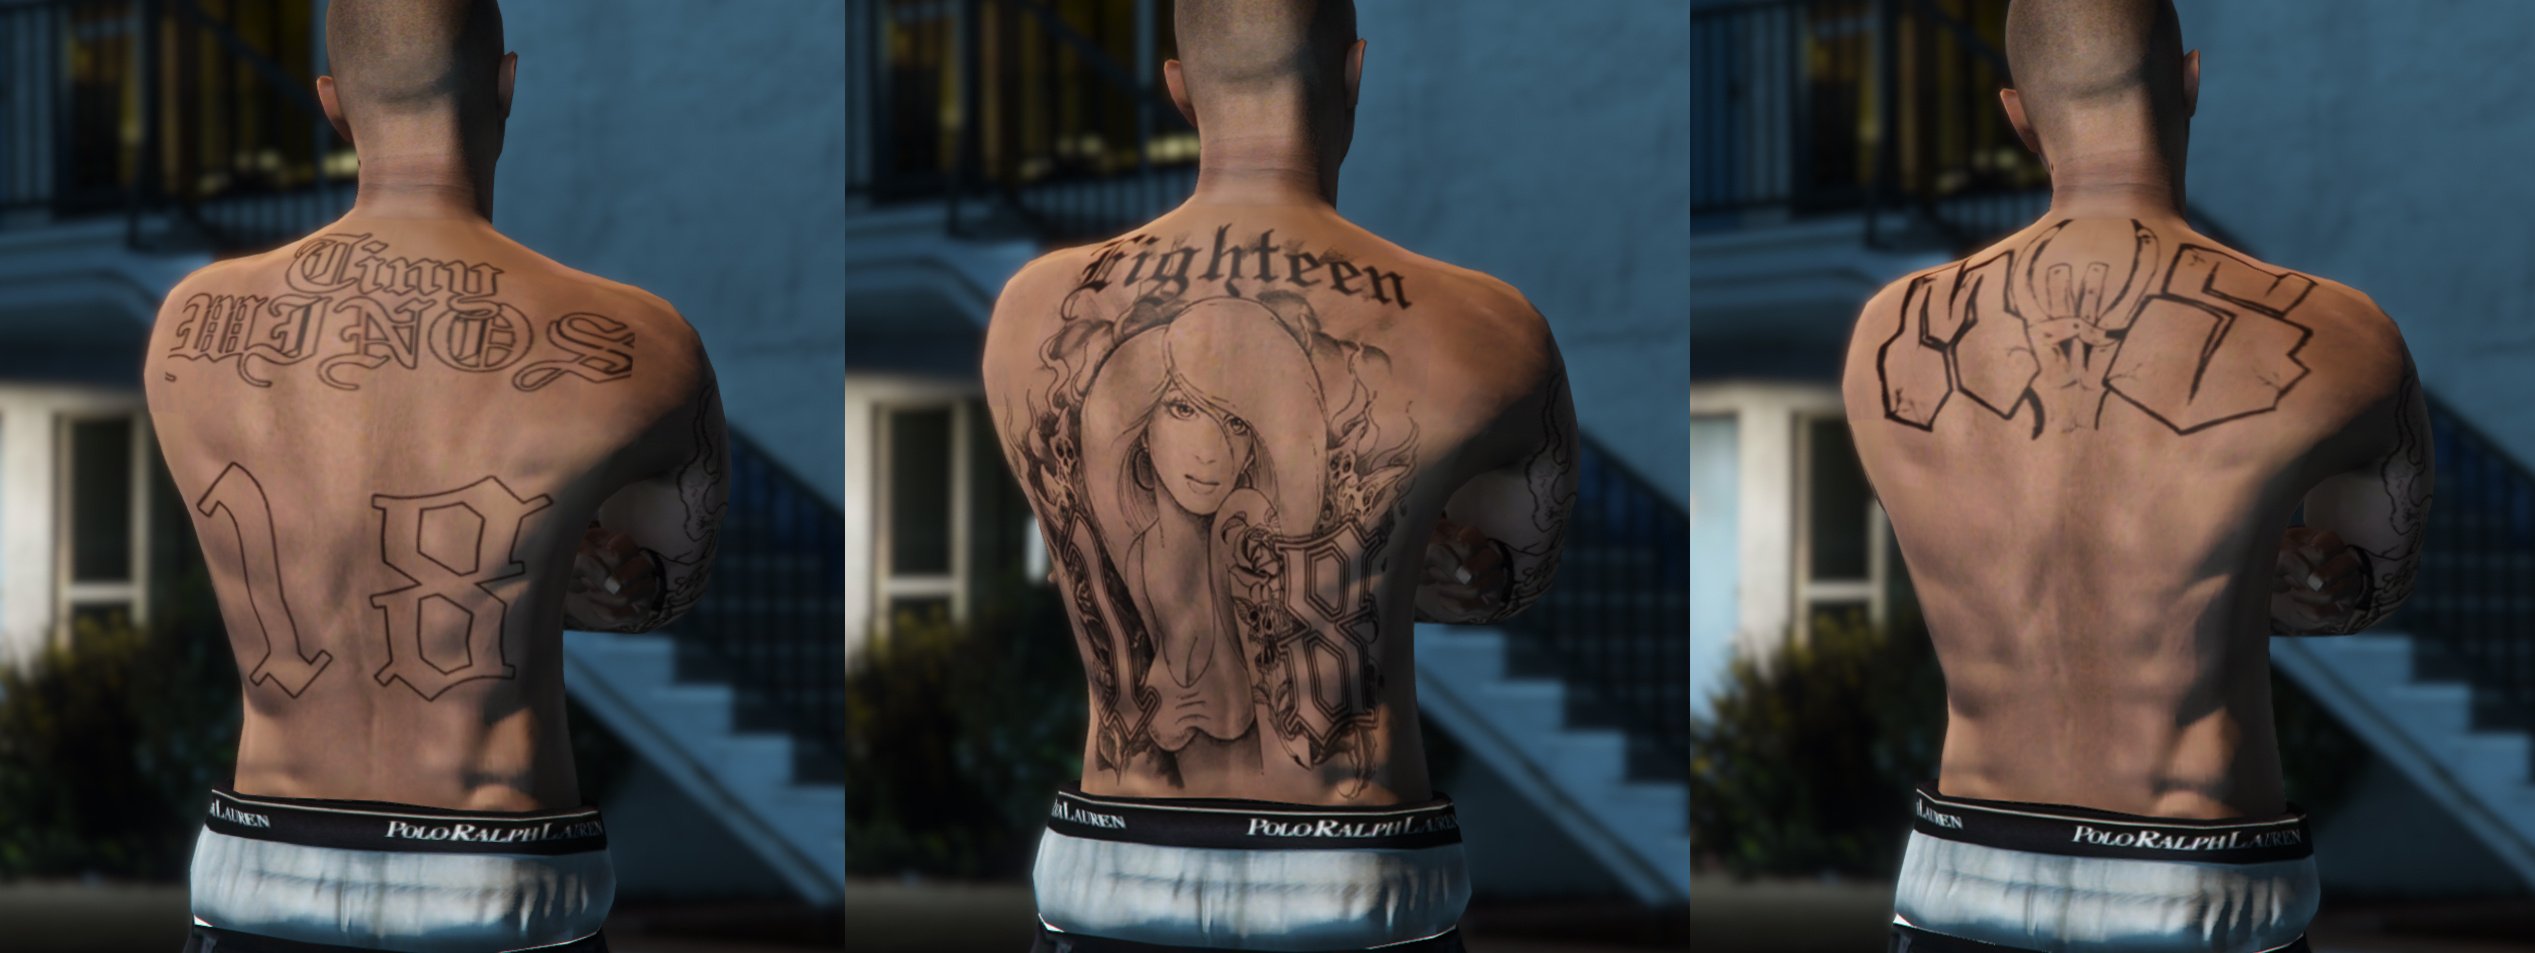 Latino Gangs Tattoos for MP Male 